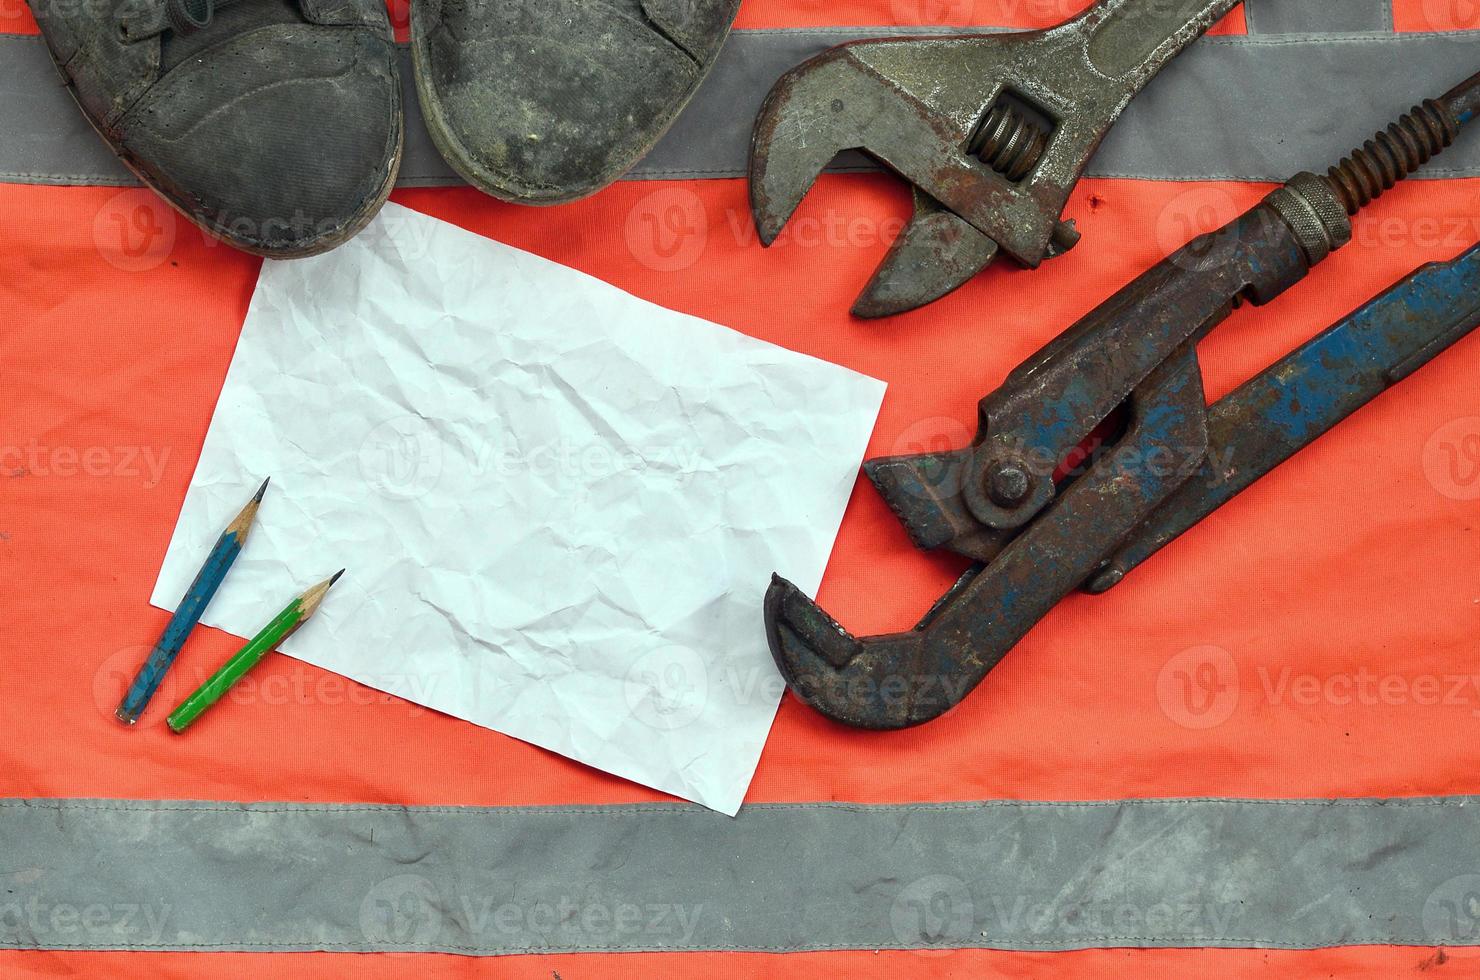 Adjustable wrenches with old boots and a sheet of paper with two pencils photo